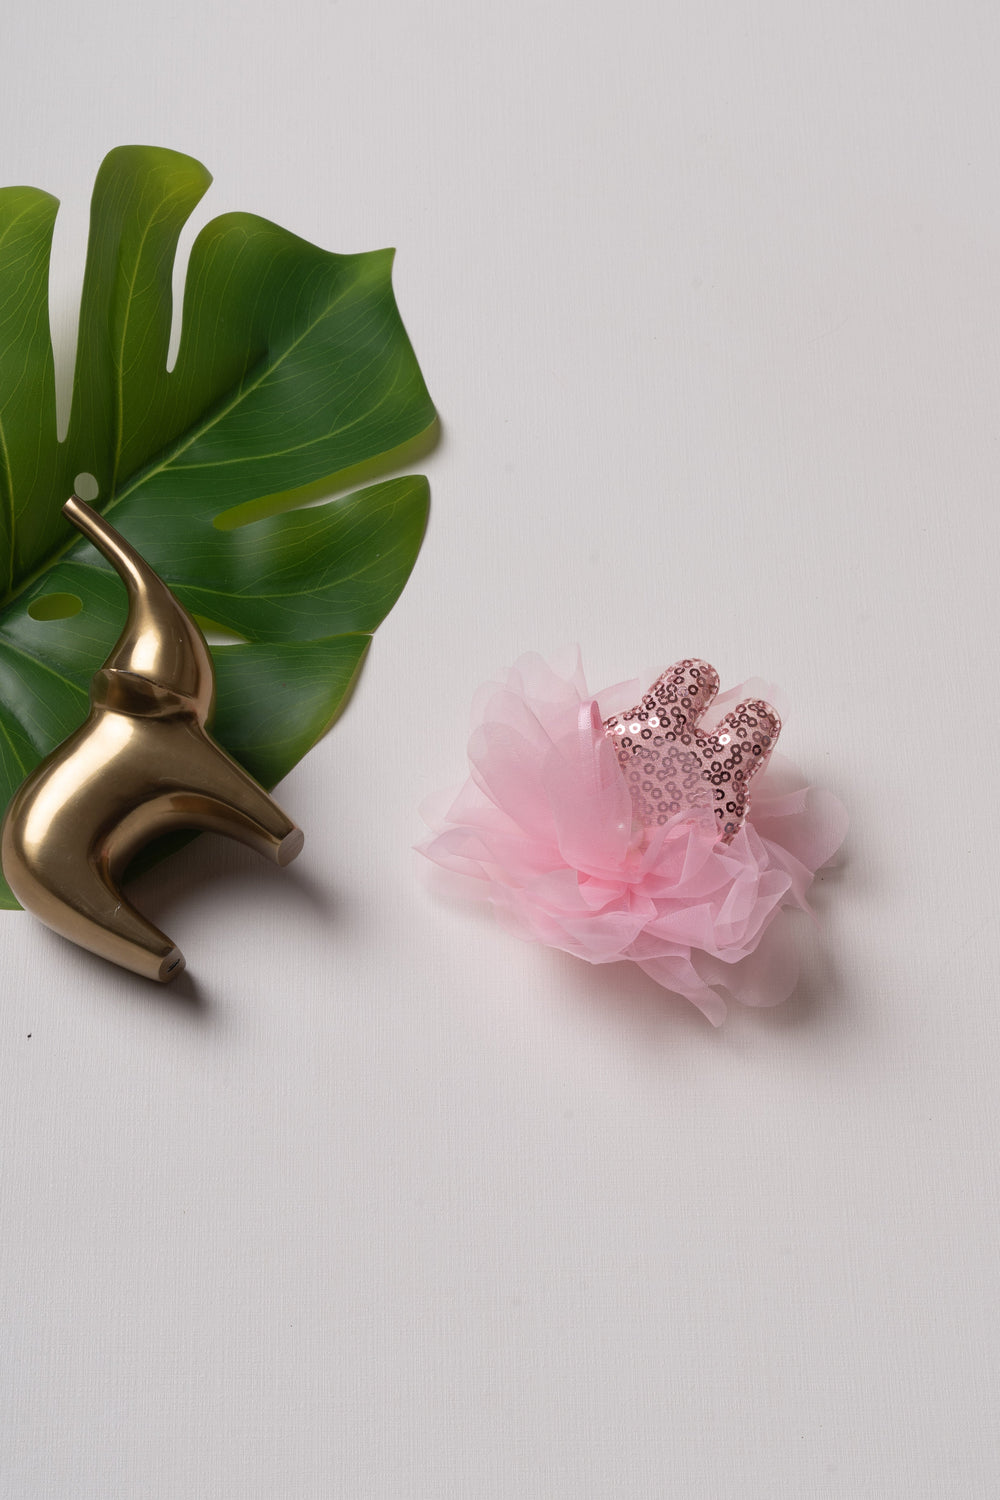 The Nesavu Hair Clip Elegant Pink Tulle Flower Hair Clip with Sequin Details Nesavu Pink JHCL65A Pink Tulle Sequined Flower Clip | Delicate Hair Accessory for Special Occasions | The Nesavu